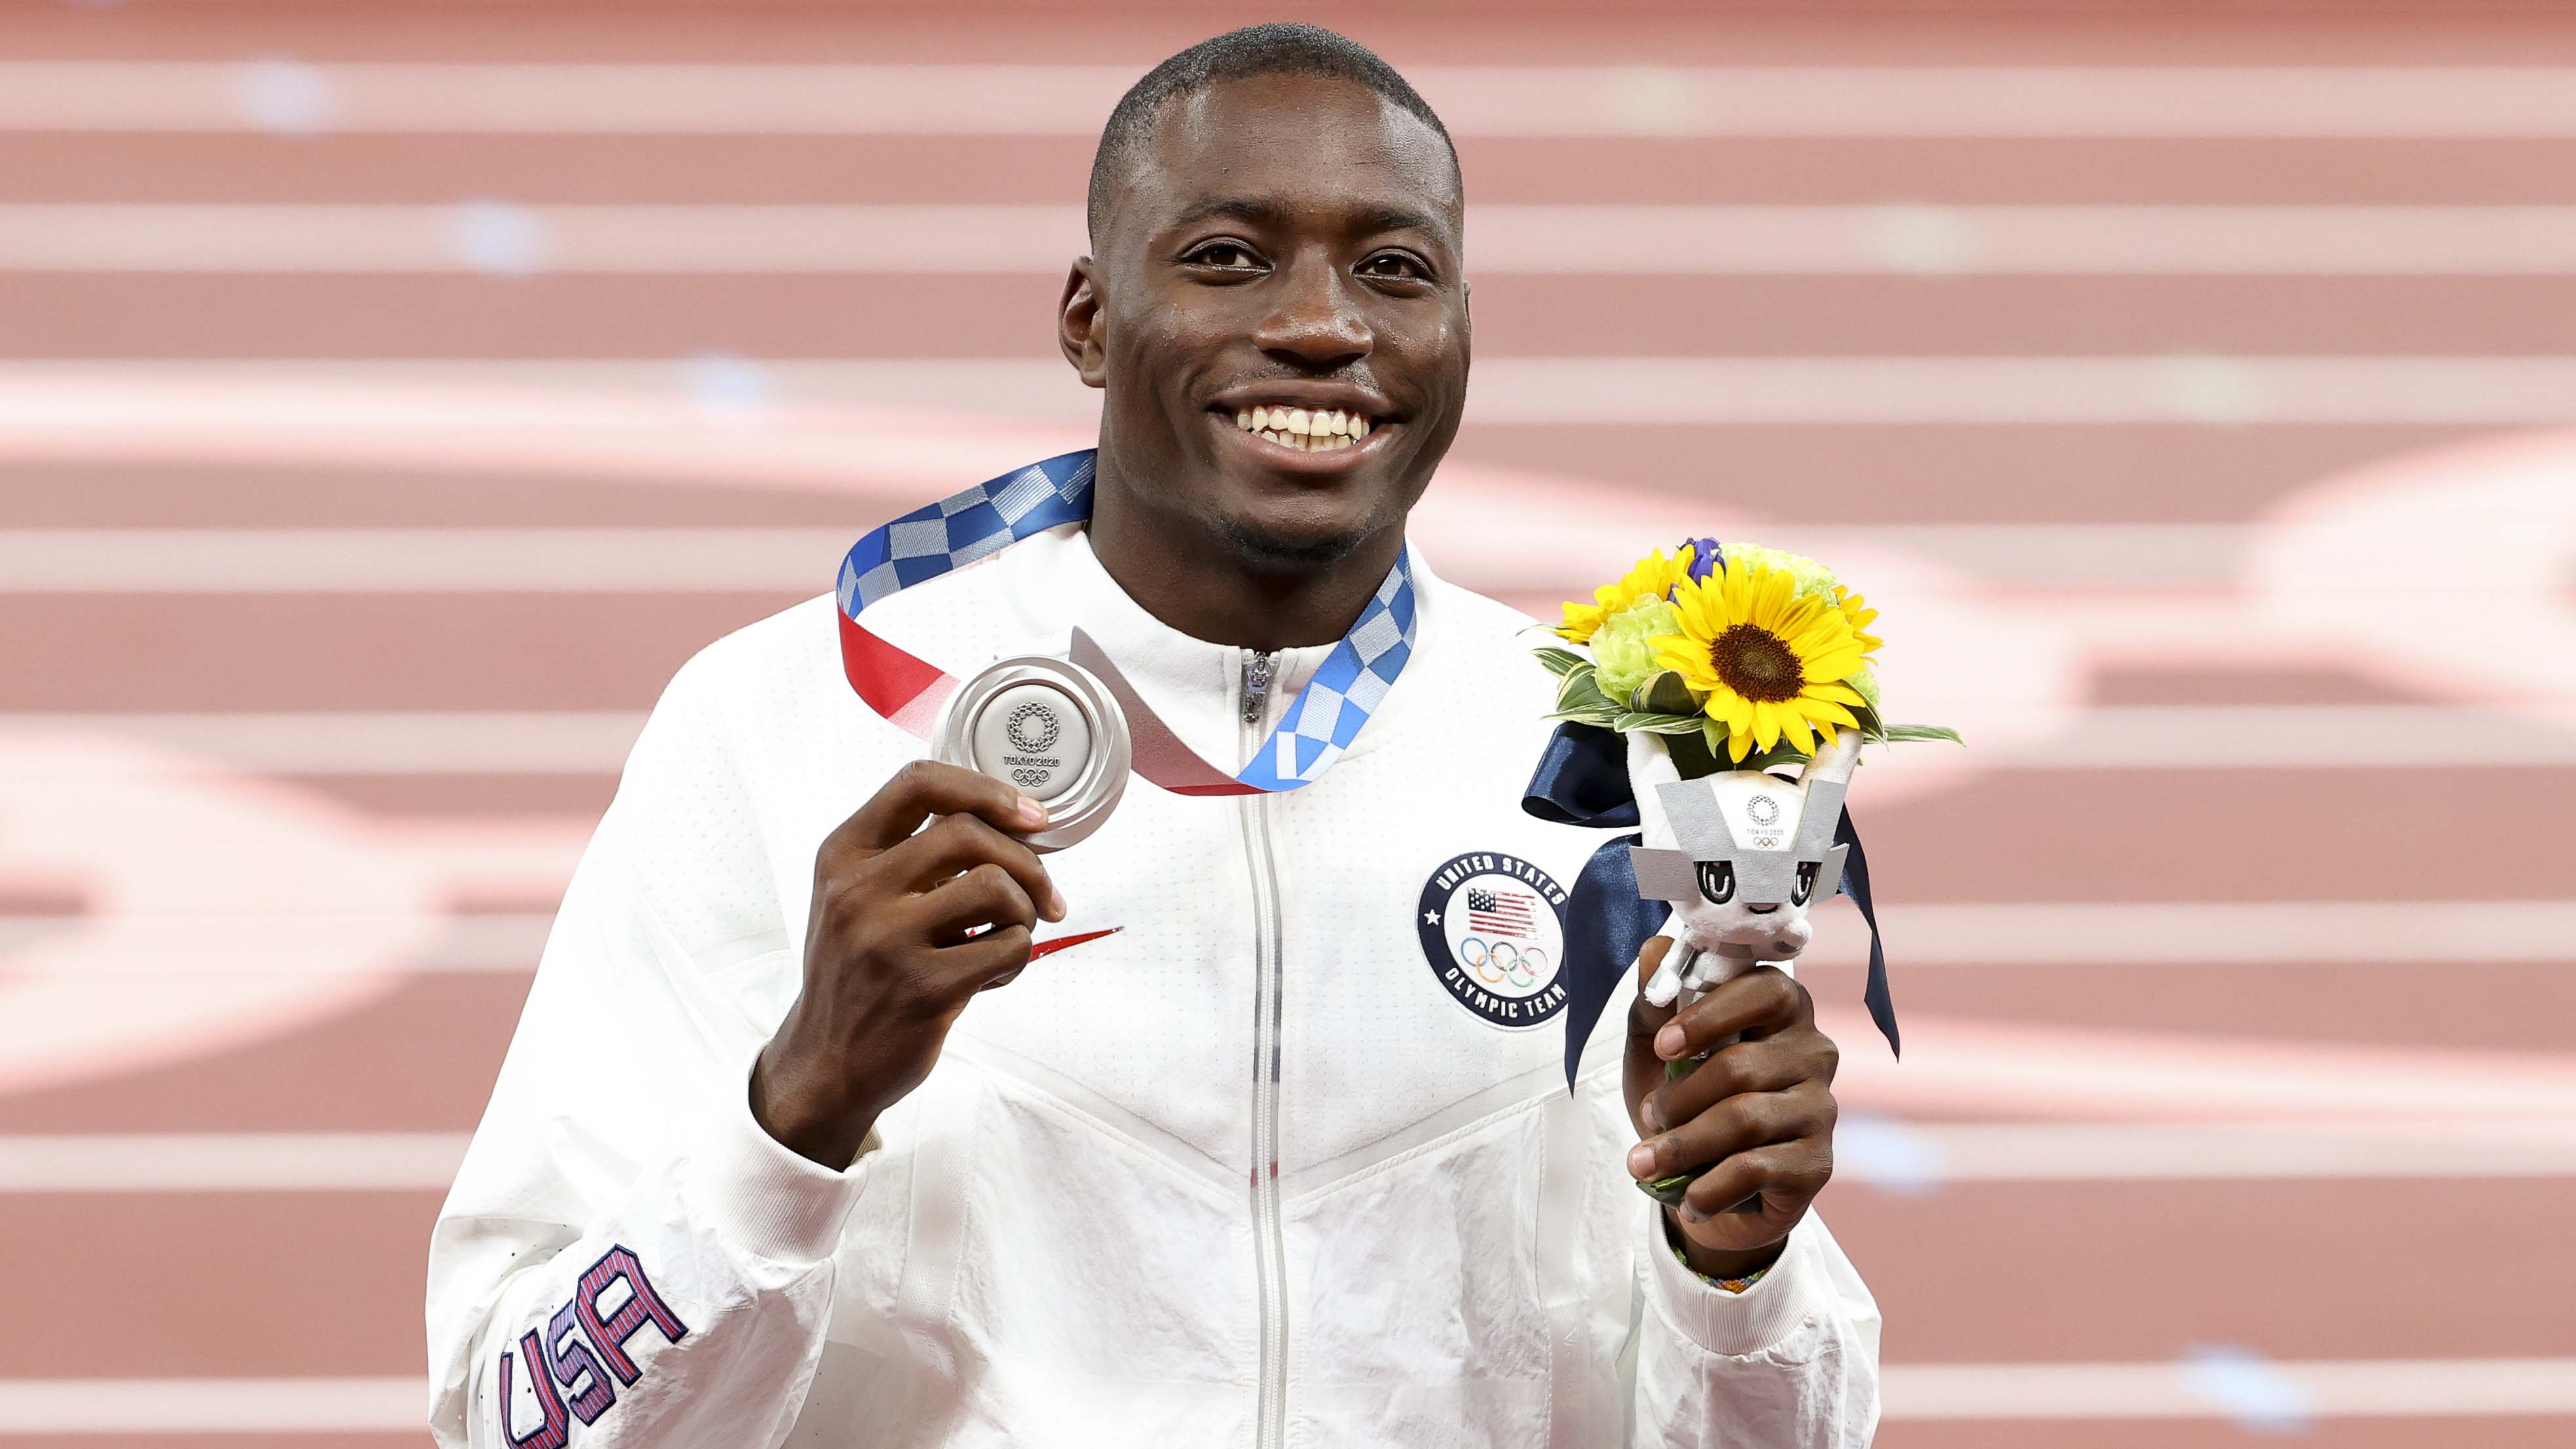 Grant Holloway seeks redemption in 2024 Olympics after Tokyo silver left ‘sour taste'